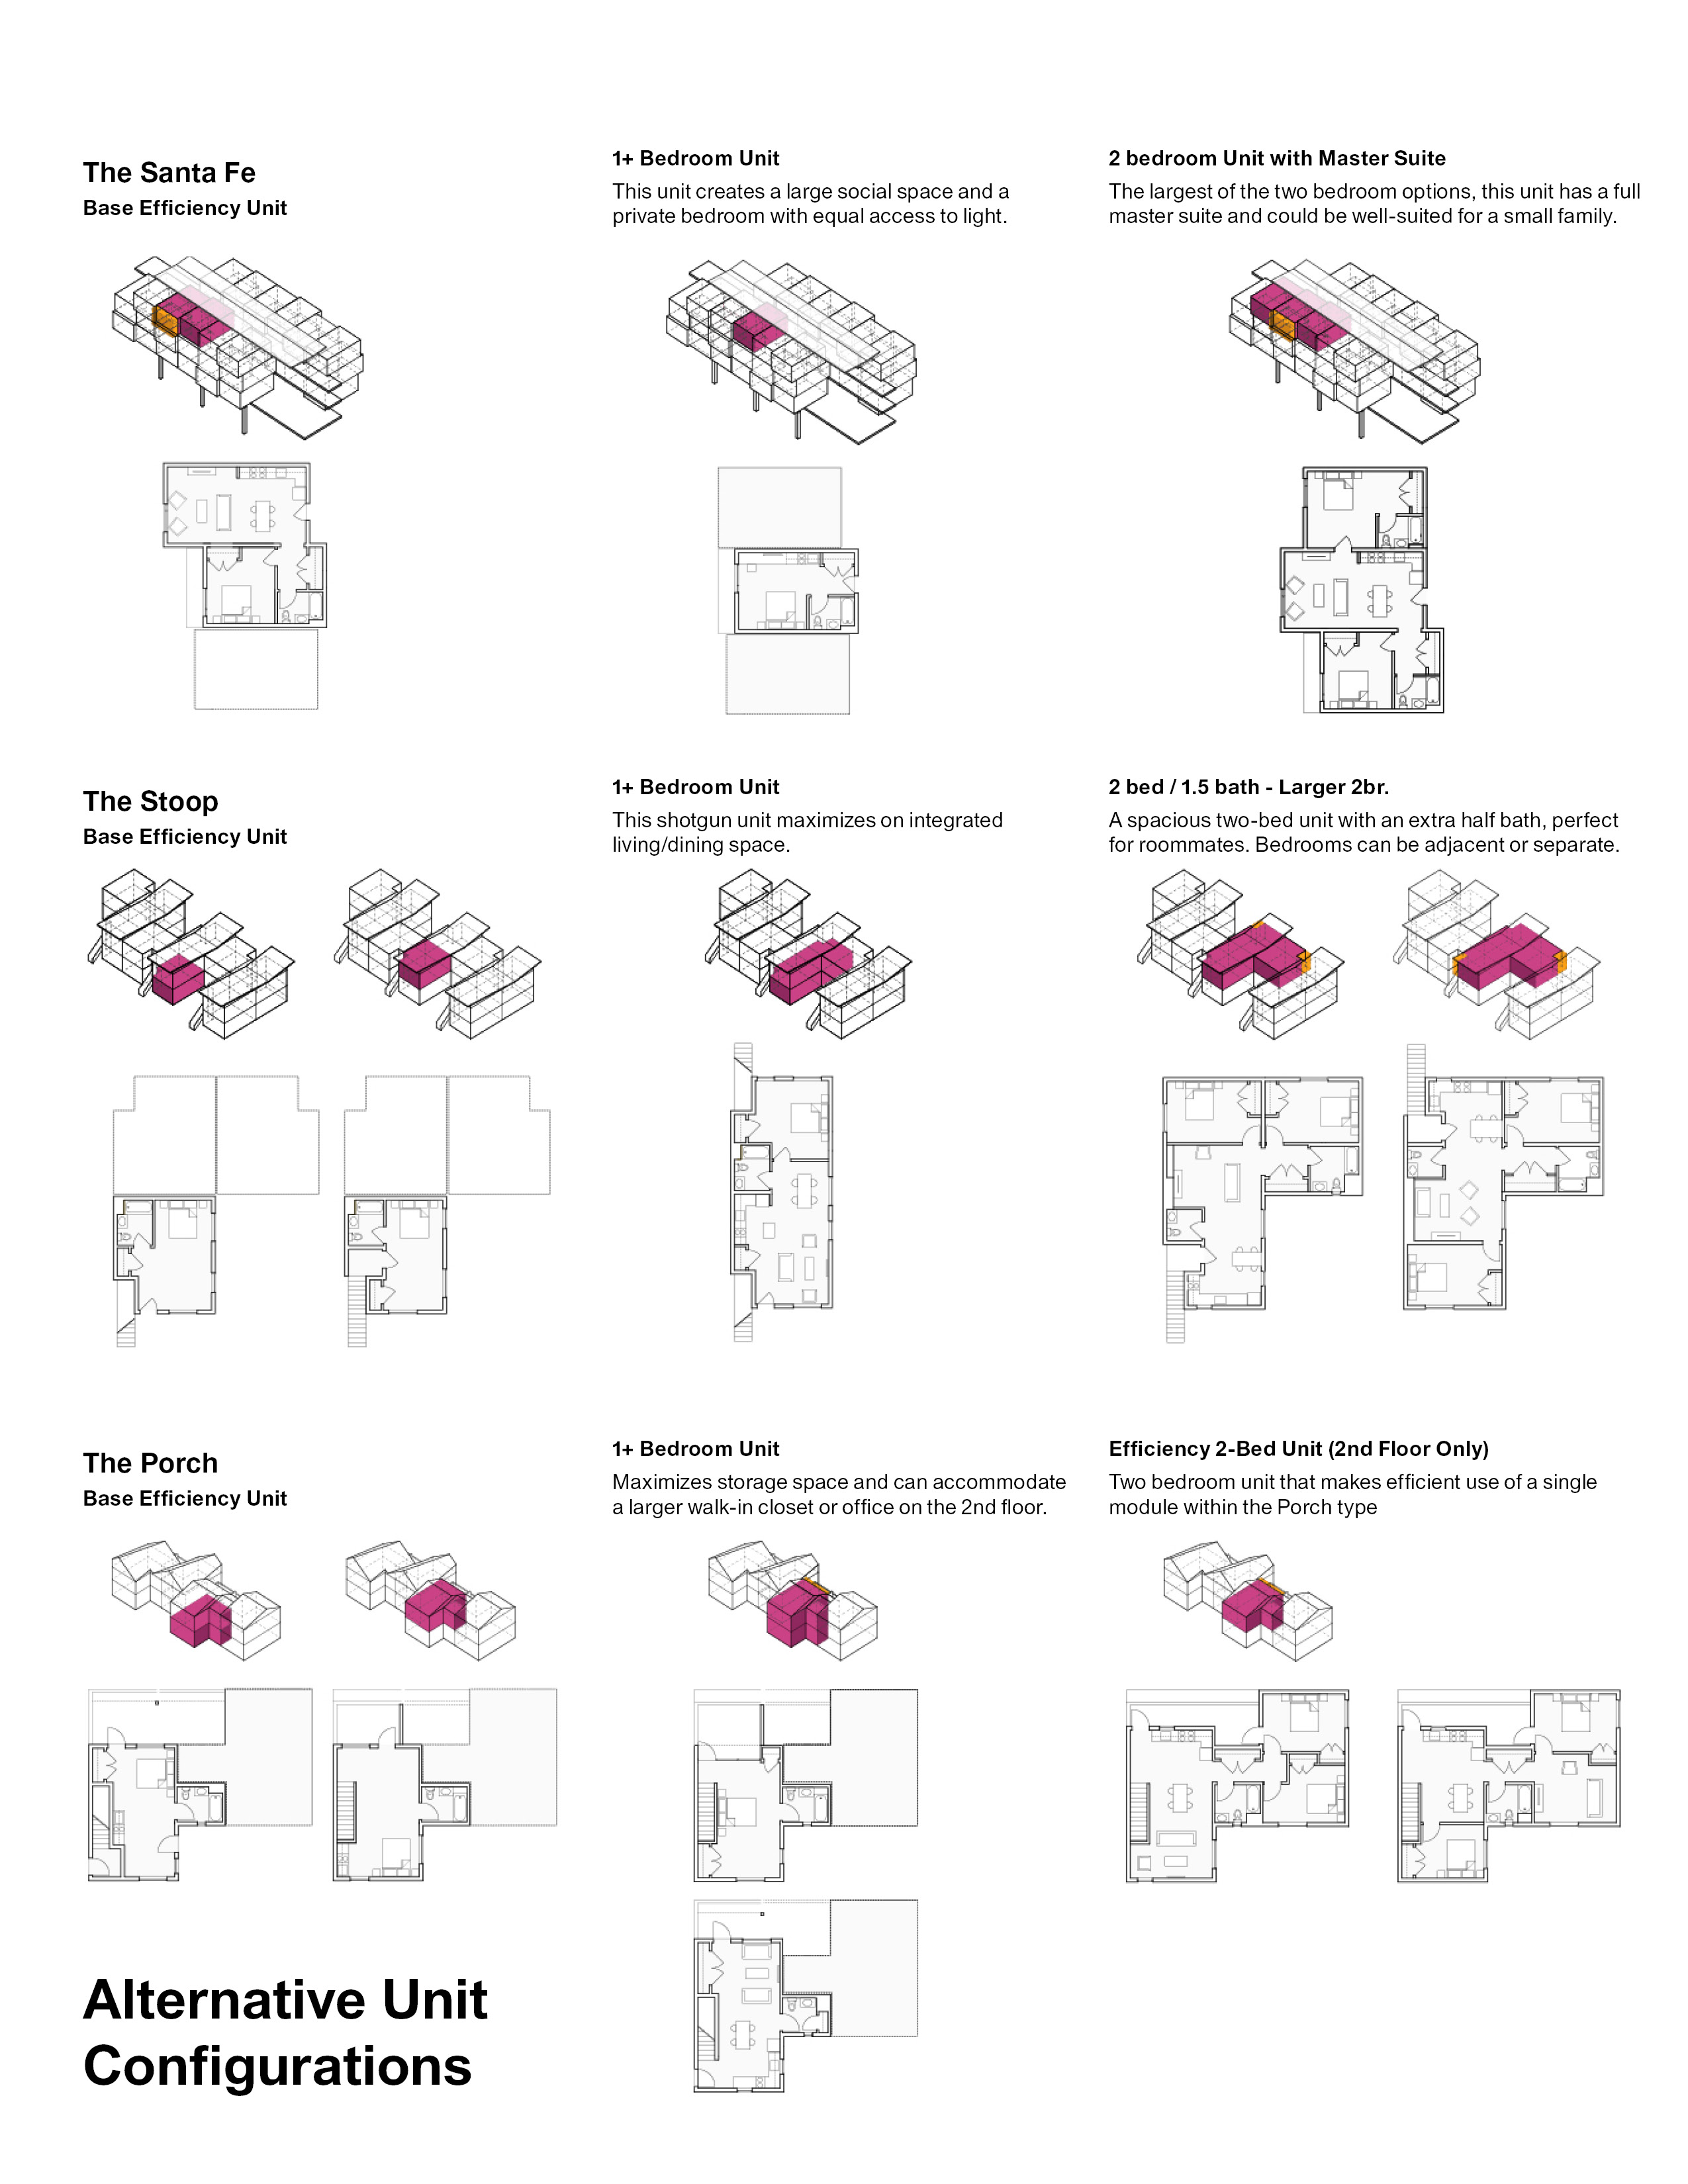 Utile wins domestiCITY Affordable Housing Design Competition!